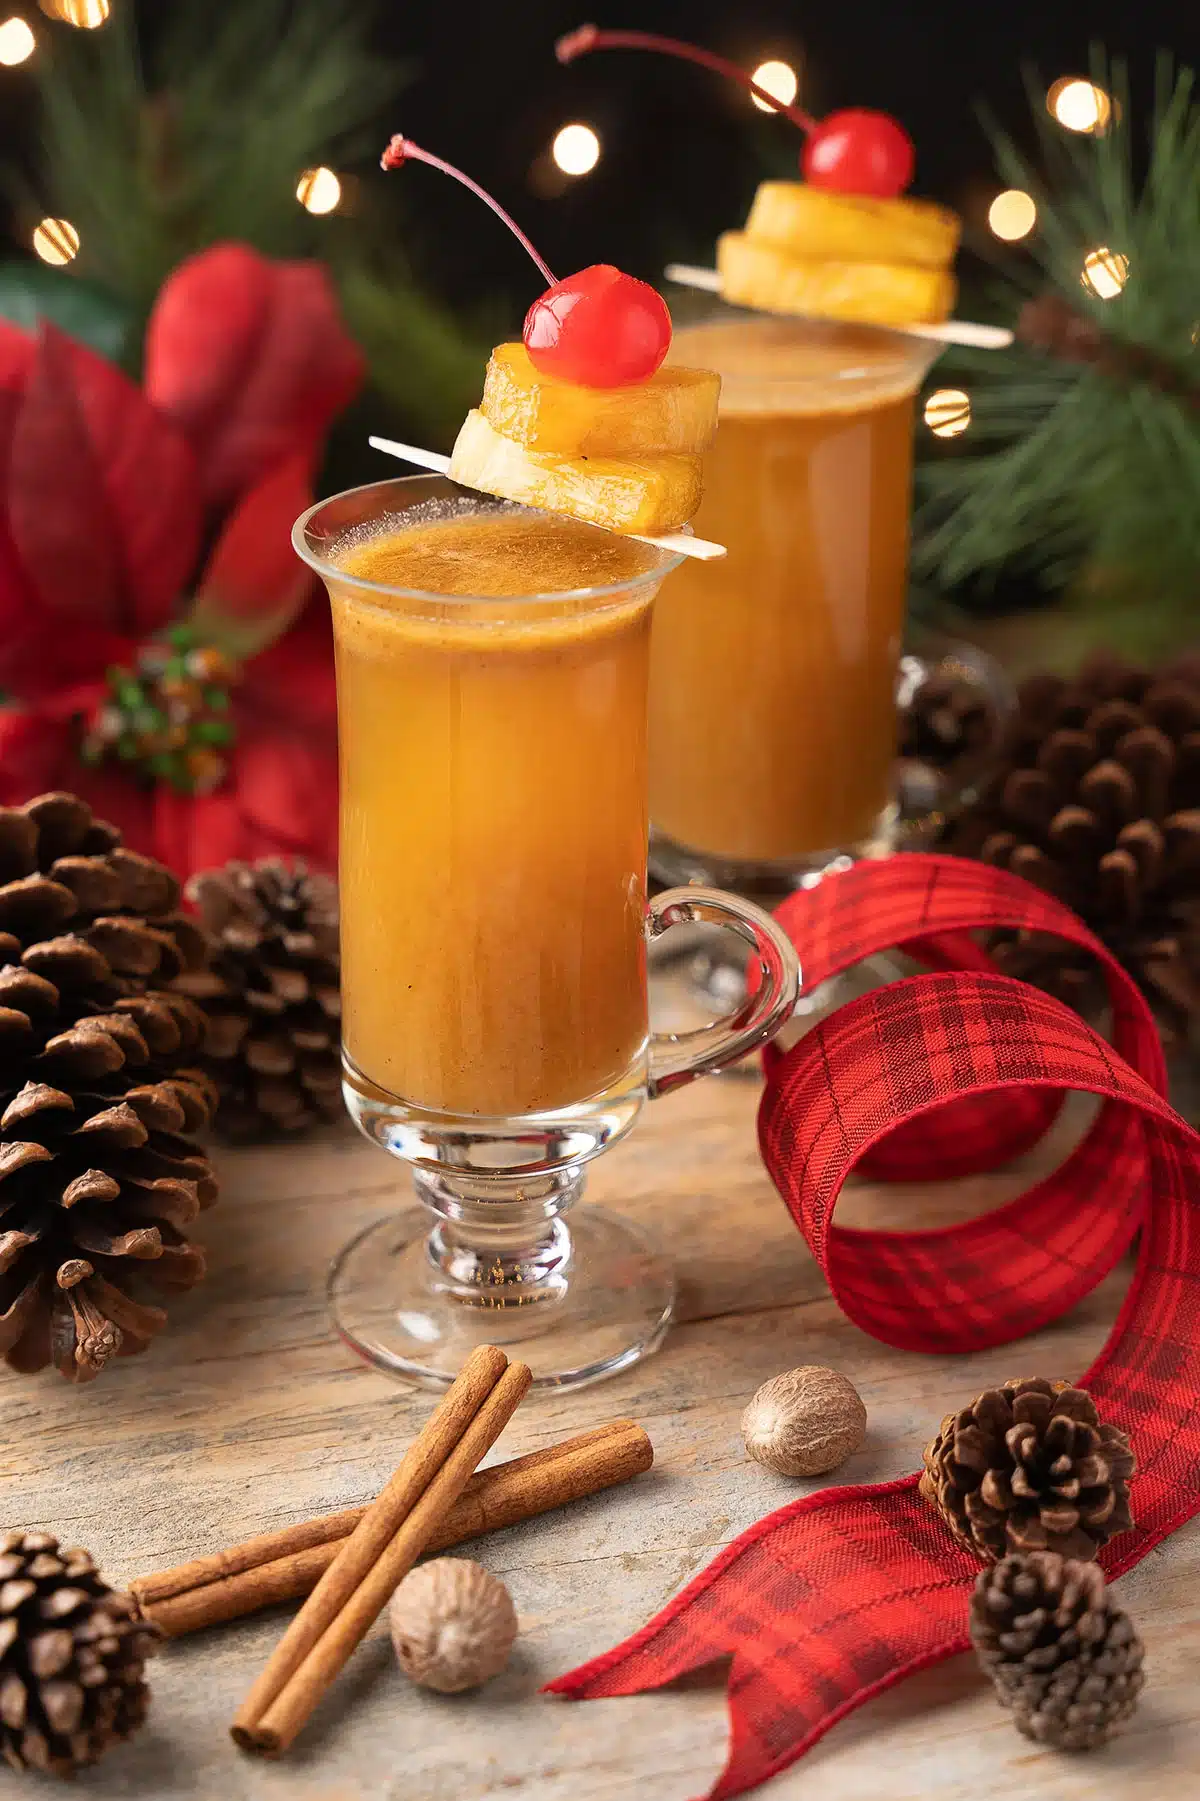 Two tall glasses of dark orange drink topped with pineapple chunks and a cherry.